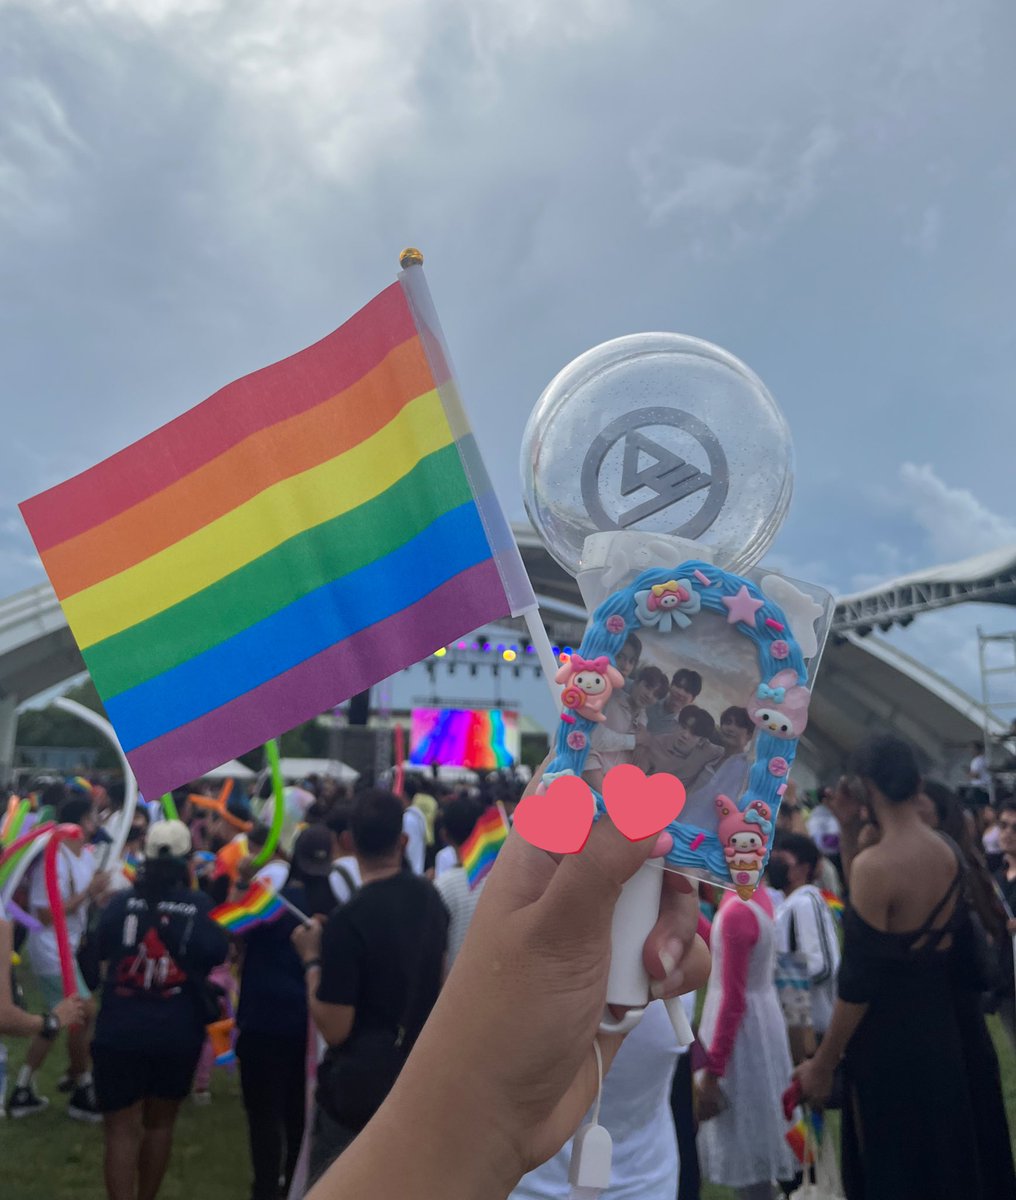 with my favorite gays ❤️ @official_ACE7 

#TAYOangKULAYAAN #SOGIEEqualityNOW
#Pride2023 #PrideMarch #PrideMonth